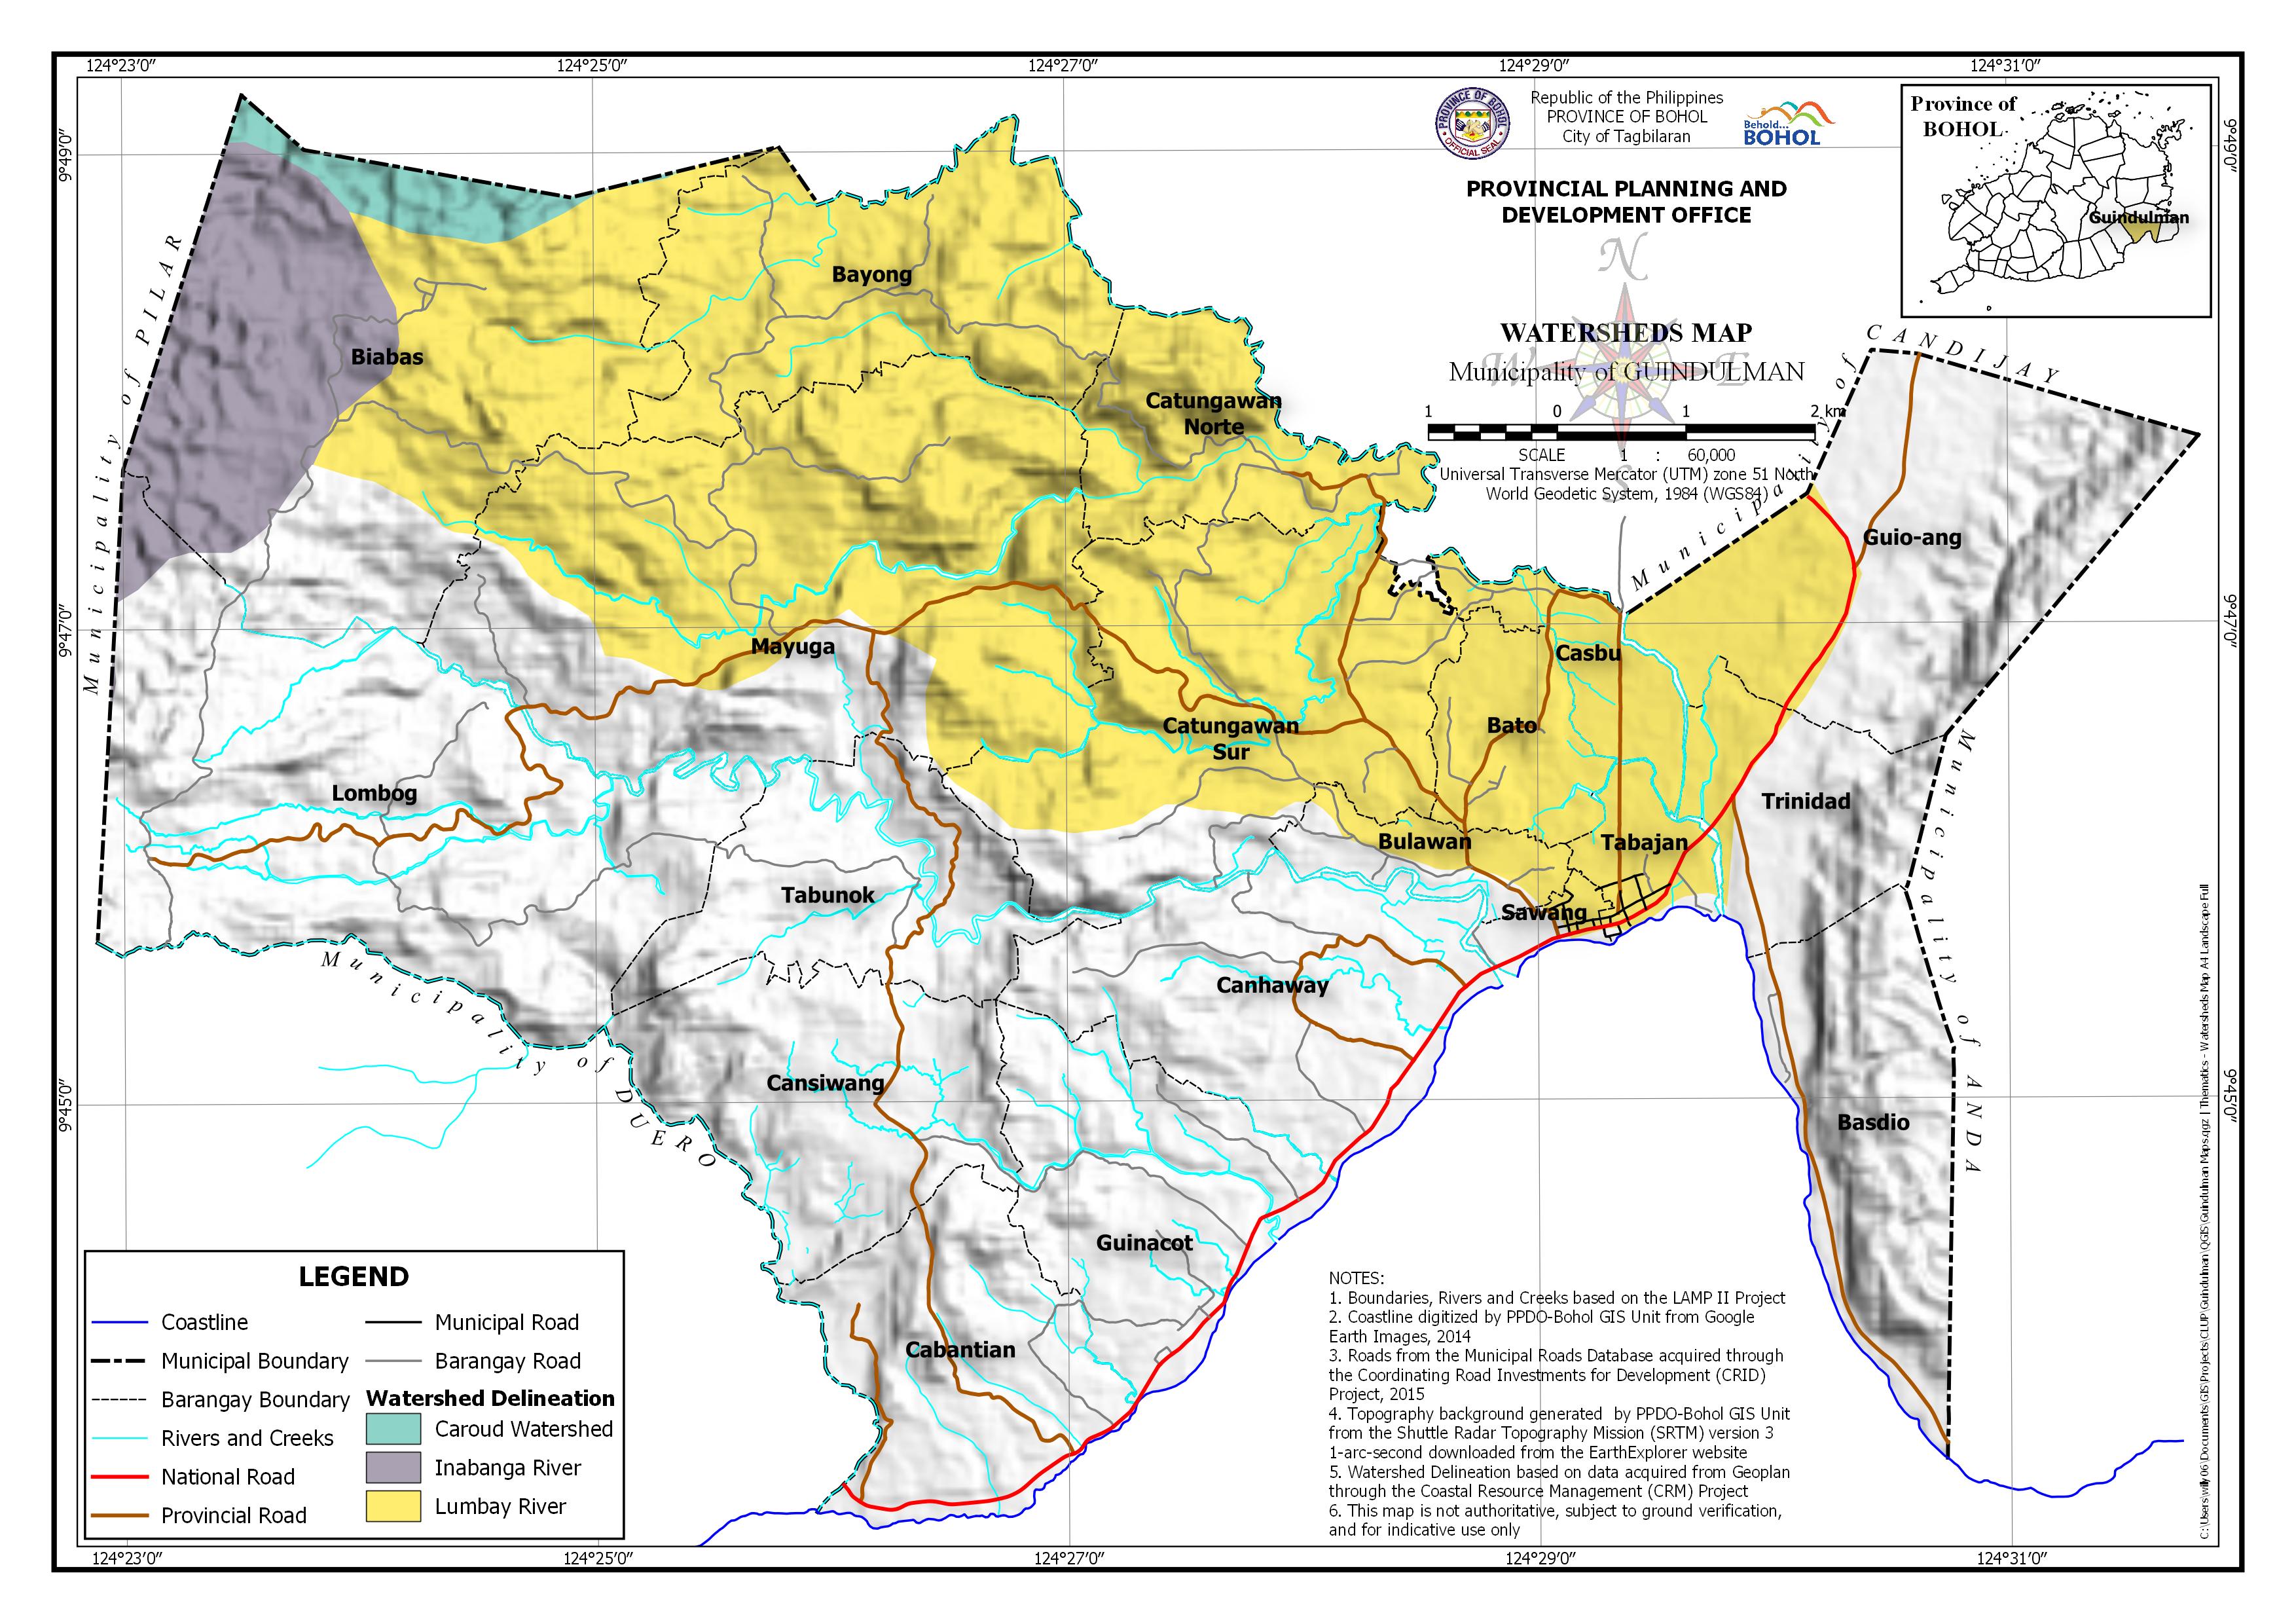 Watersheds Map